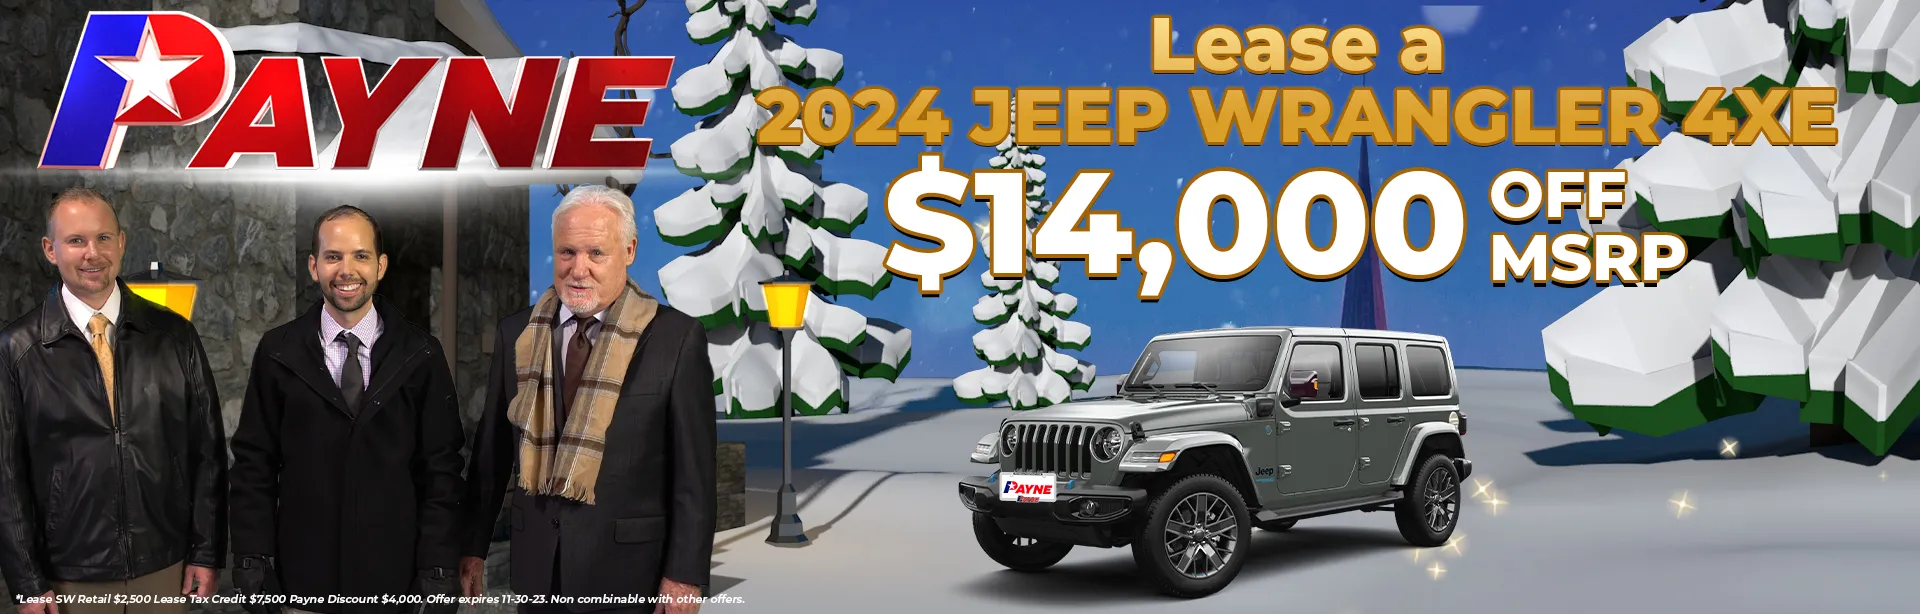 2024 Jeep Wrangler 4xe lease $14,000 Off MSRP